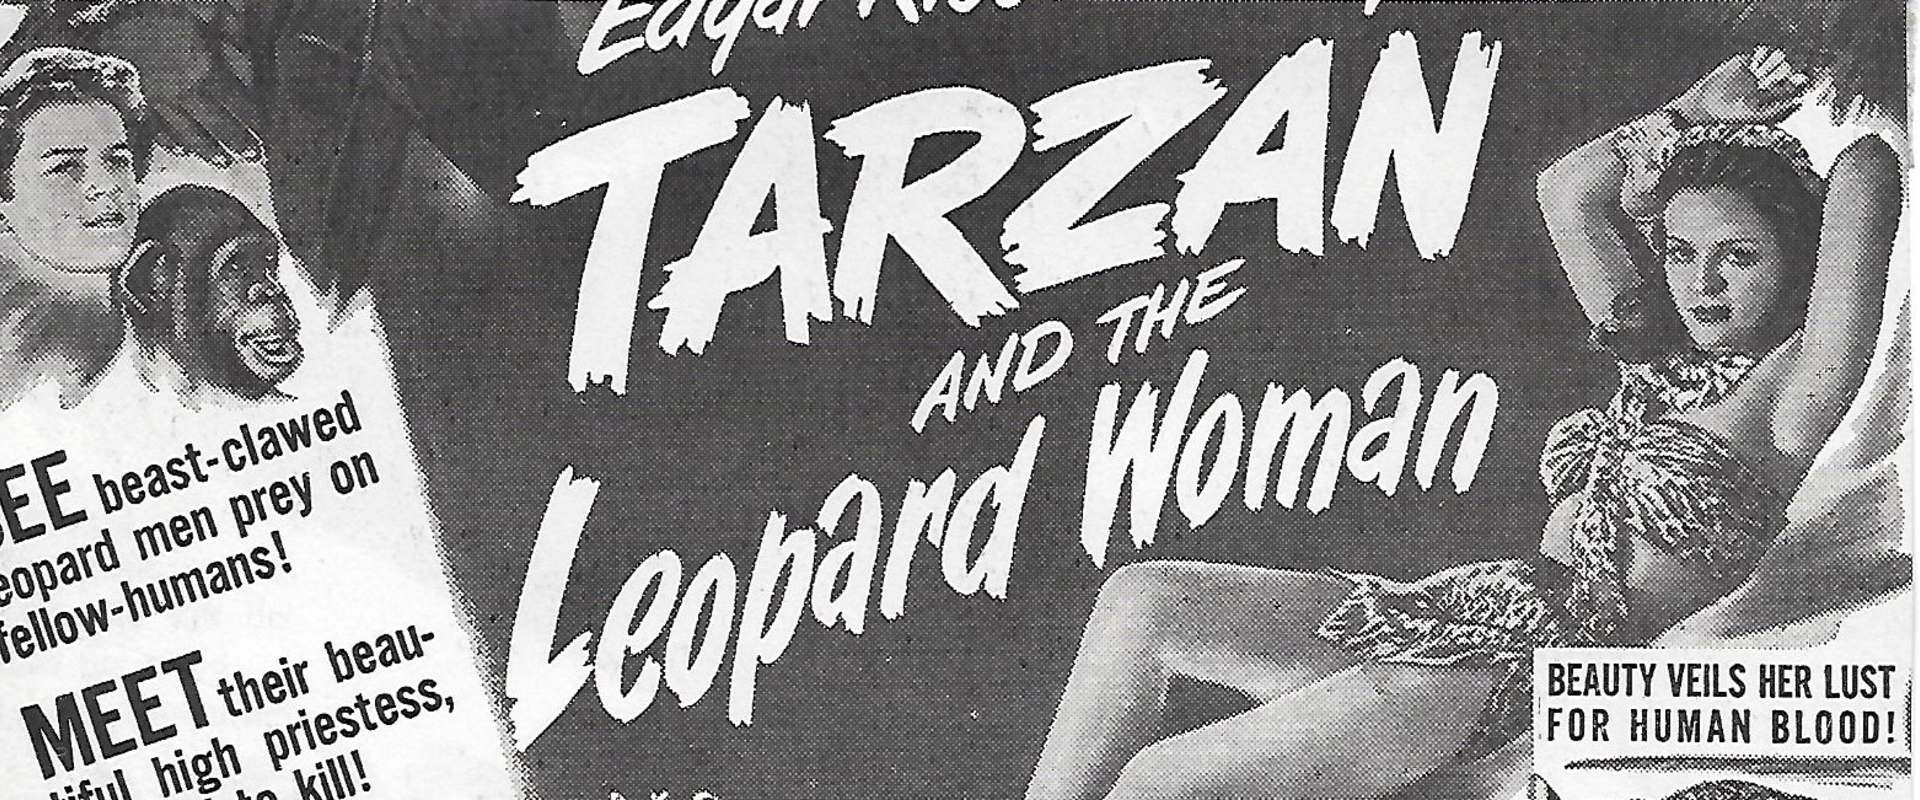 Tarzan and the Leopard Woman background 1